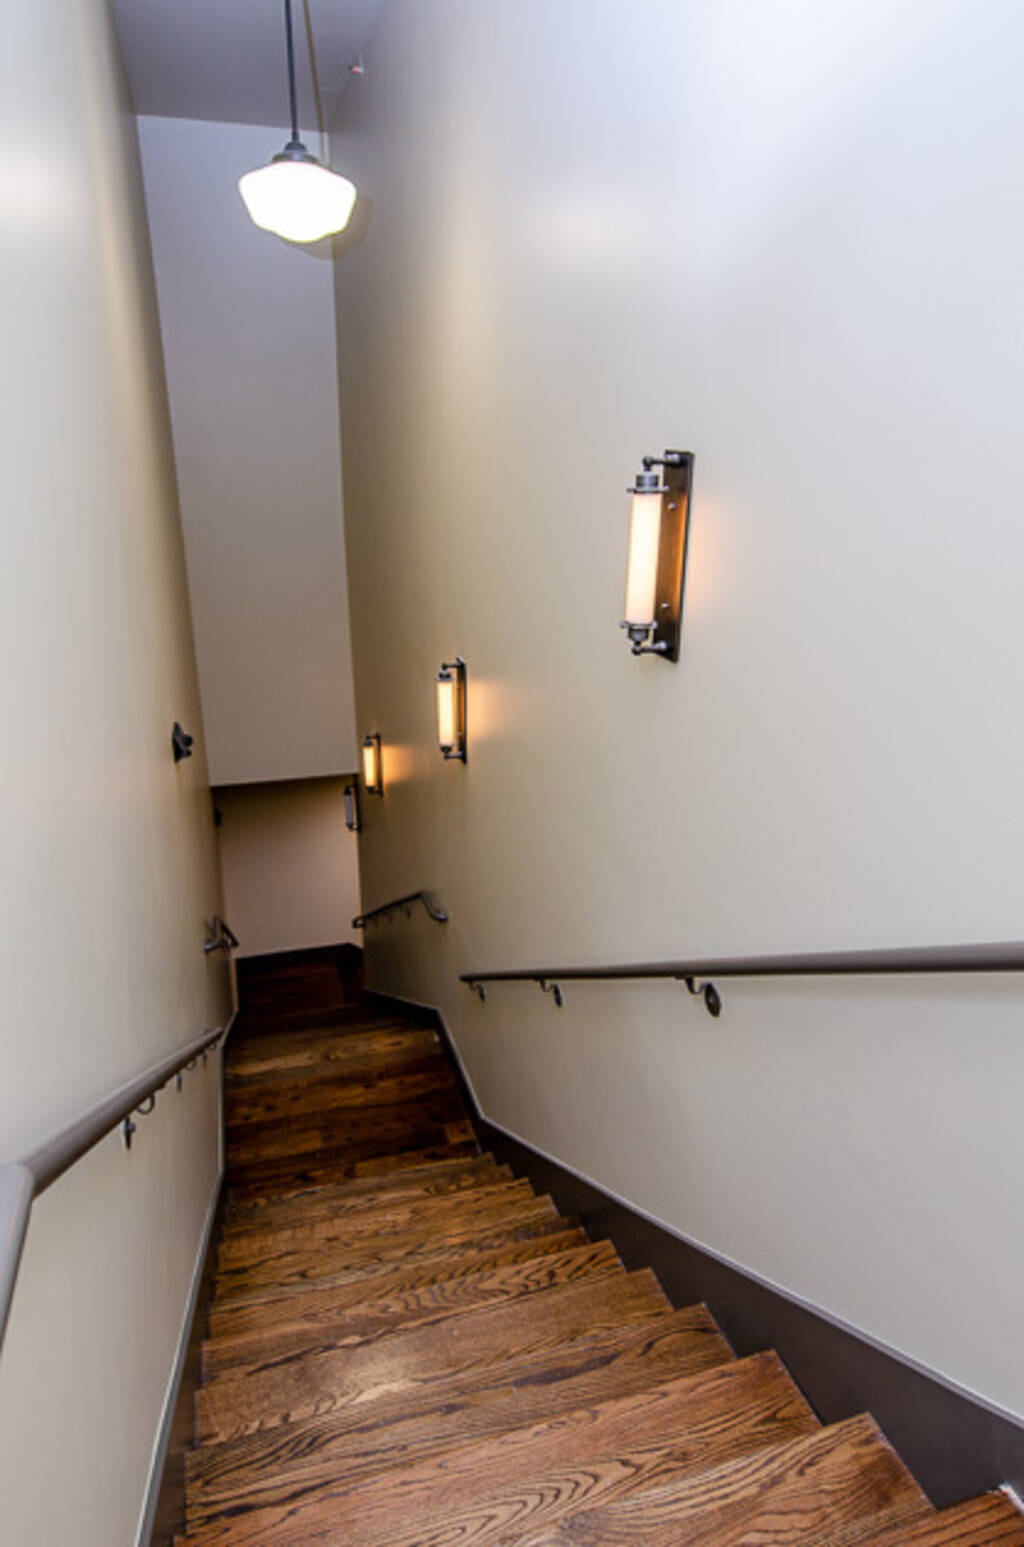 Common area staircase ceiling lighting